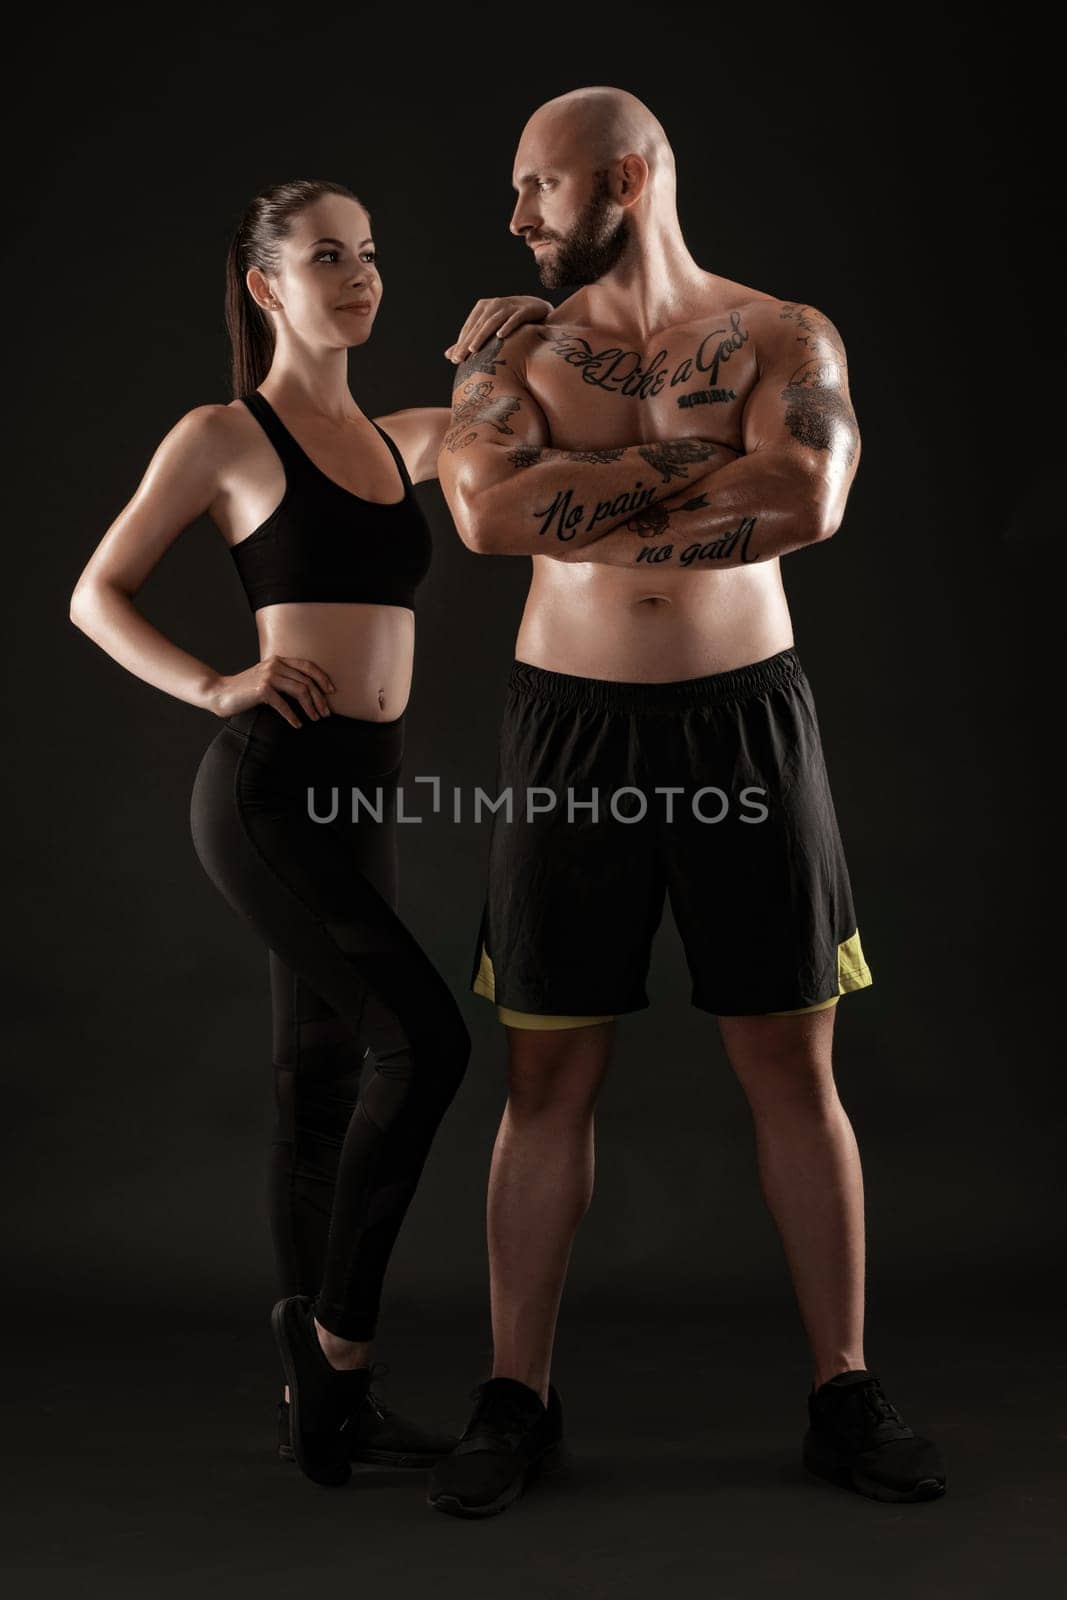 Good-looking bald, tattooed man in black shorts and sneakers with attractive brunette maiden in leggings and top are posing on black background and looking at each other. Fitness couple, chic muscular bodies, gym concept. The love story.